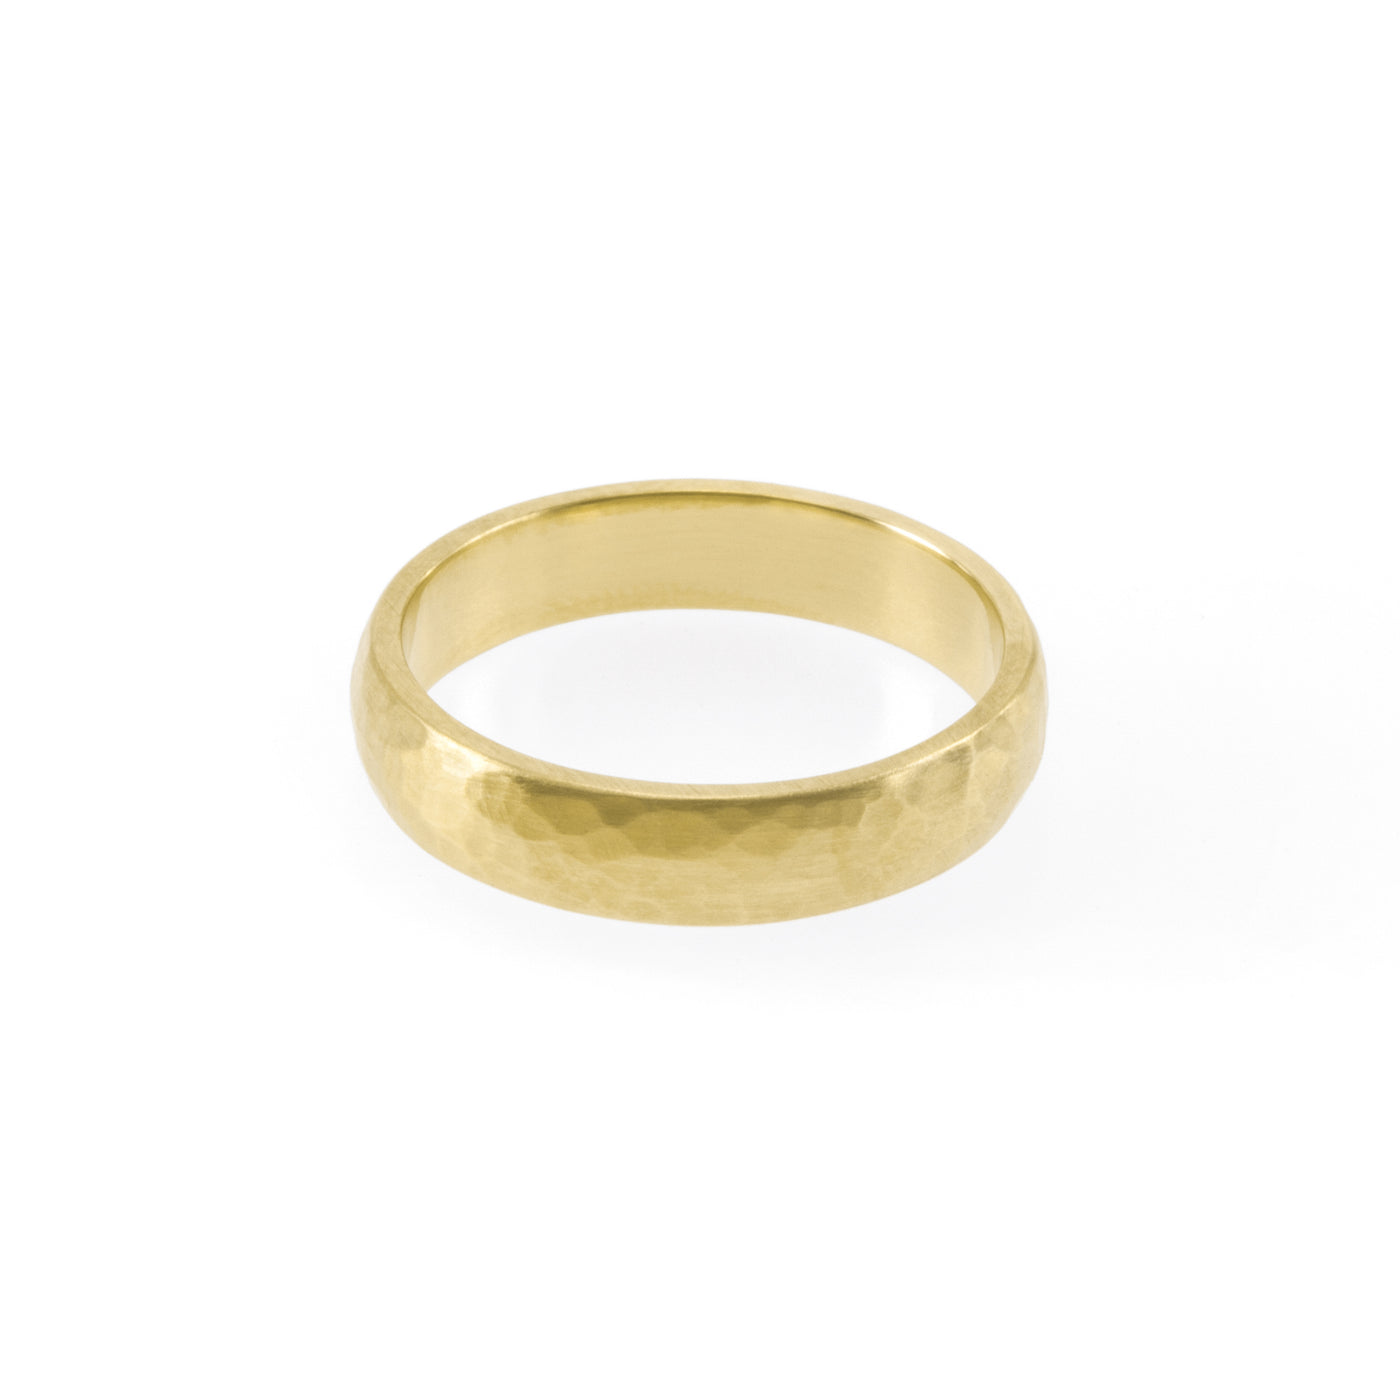 Eco-friendly gold ring. This sustainable Hammered Band is handmade in Cape Town in recycled gold from e-waste.